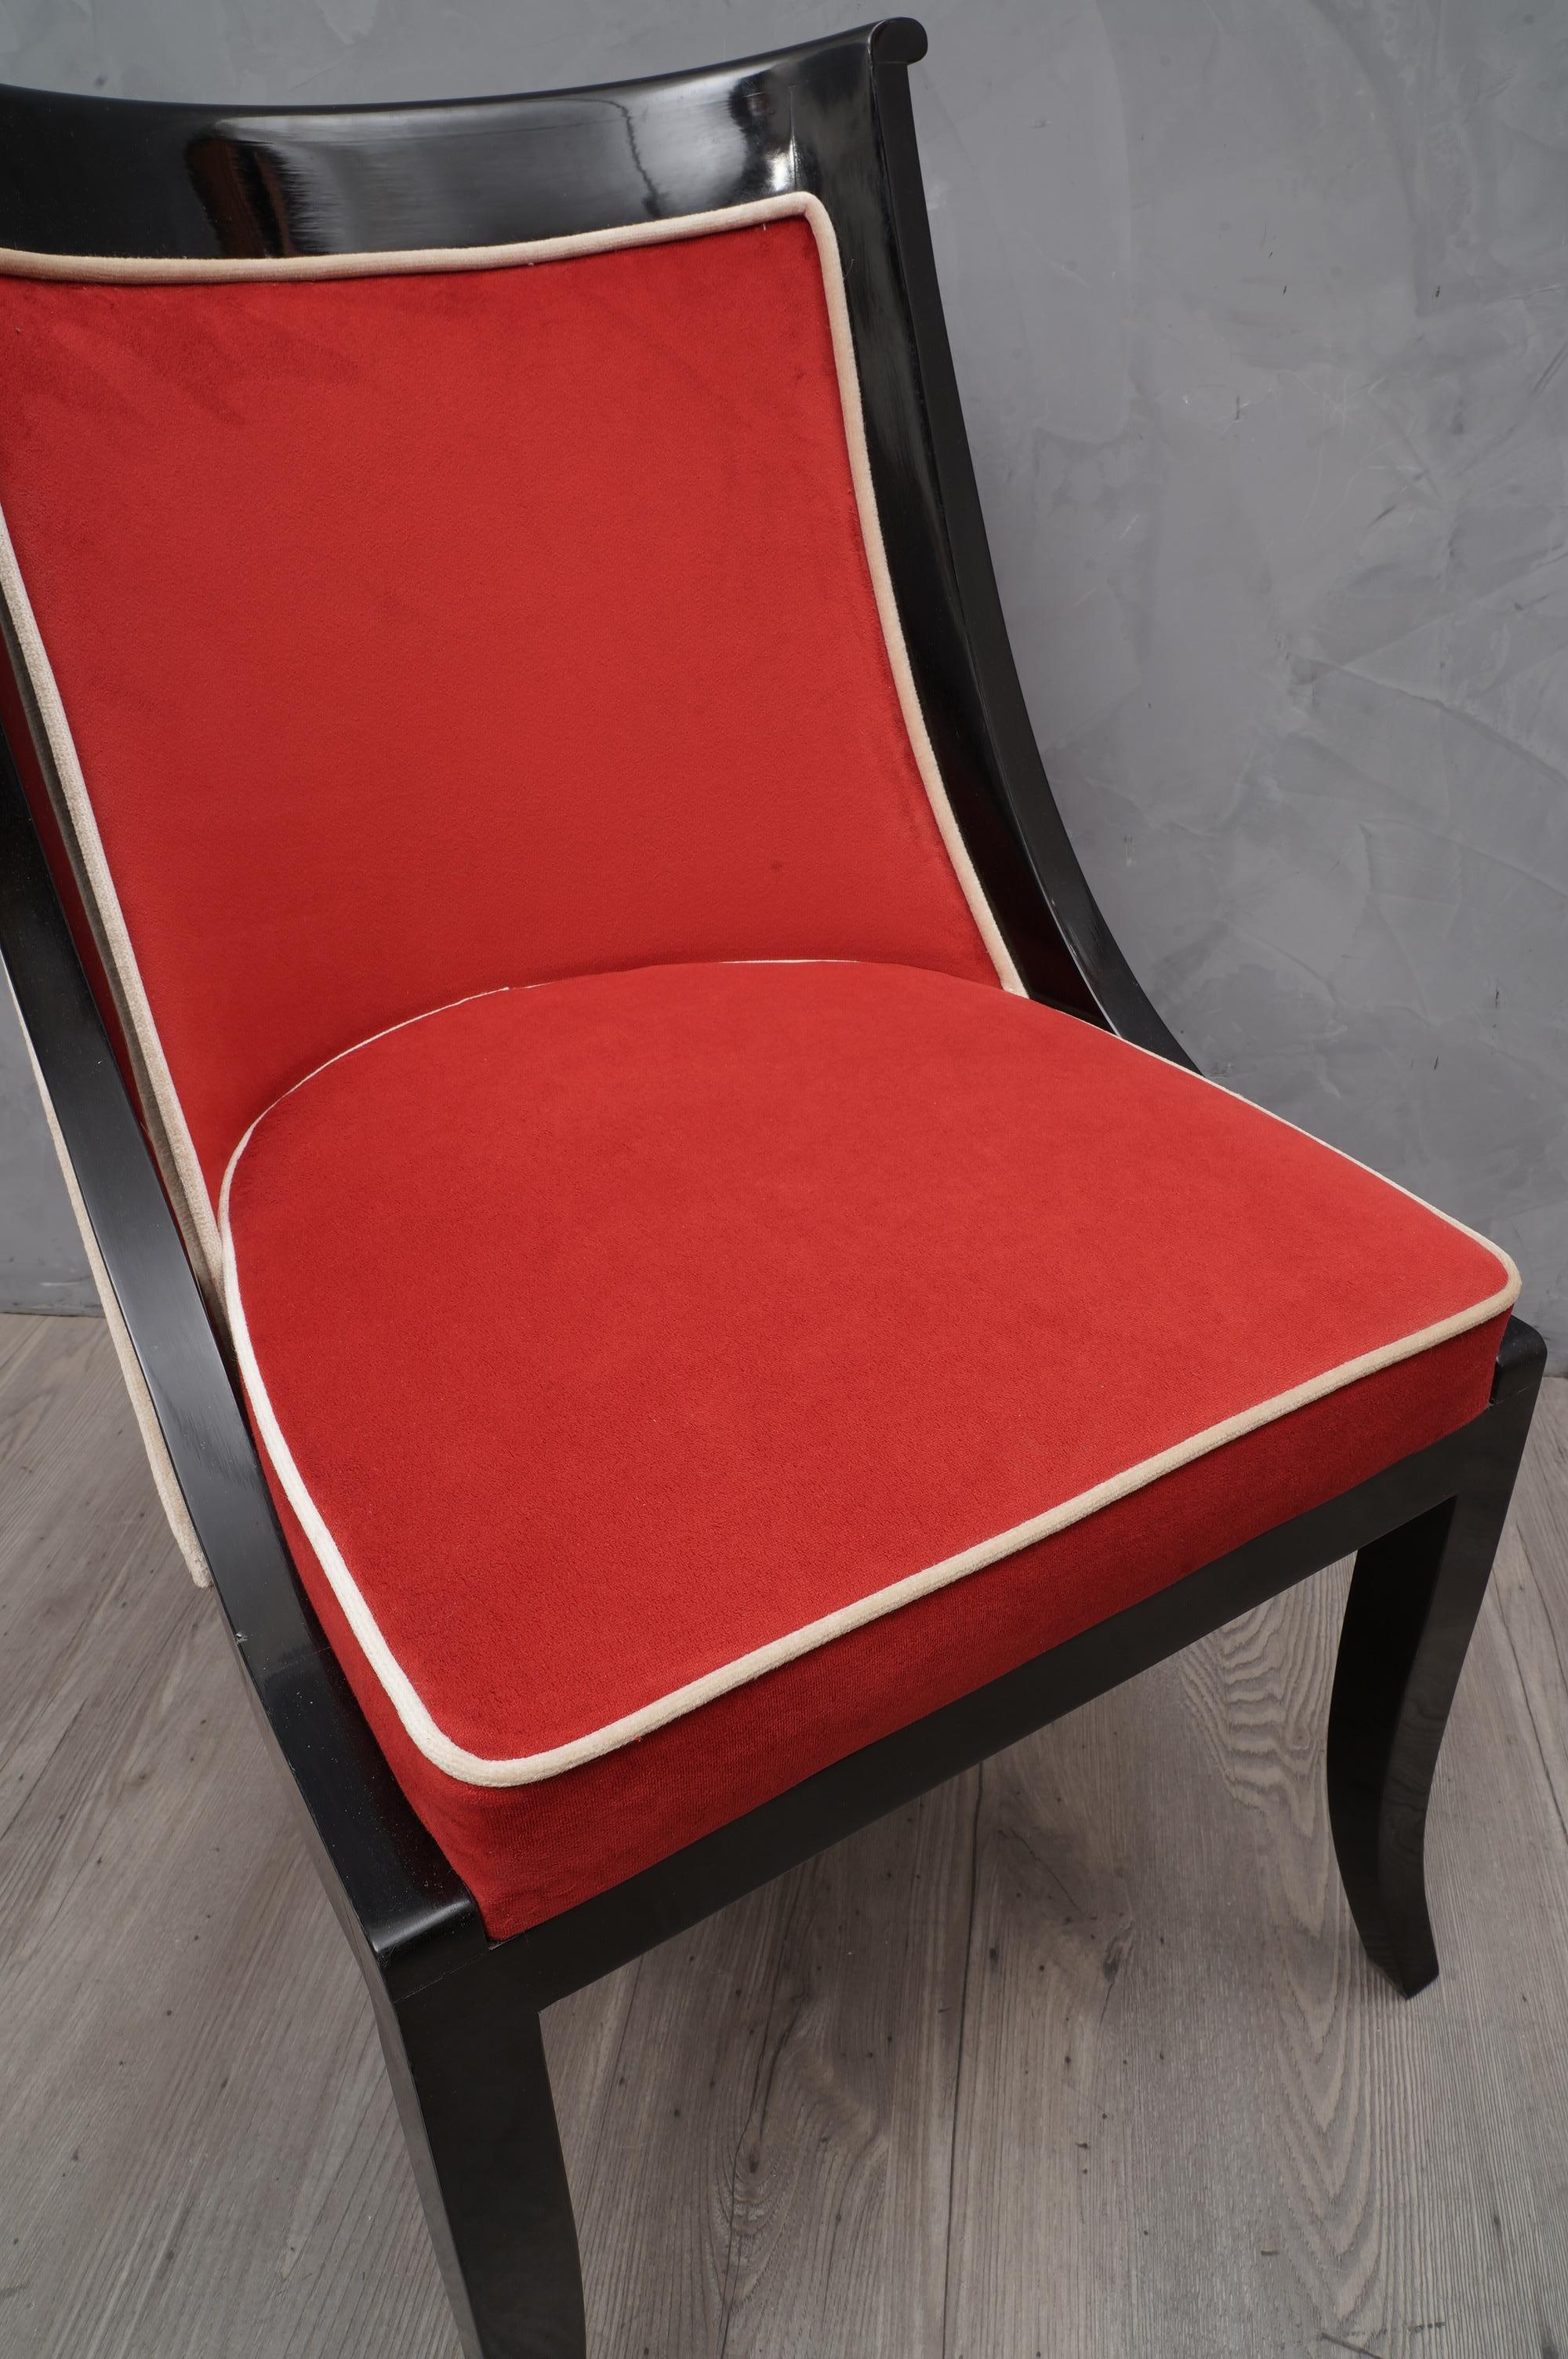 Presented in an elegant red look, these six French chairs have a 